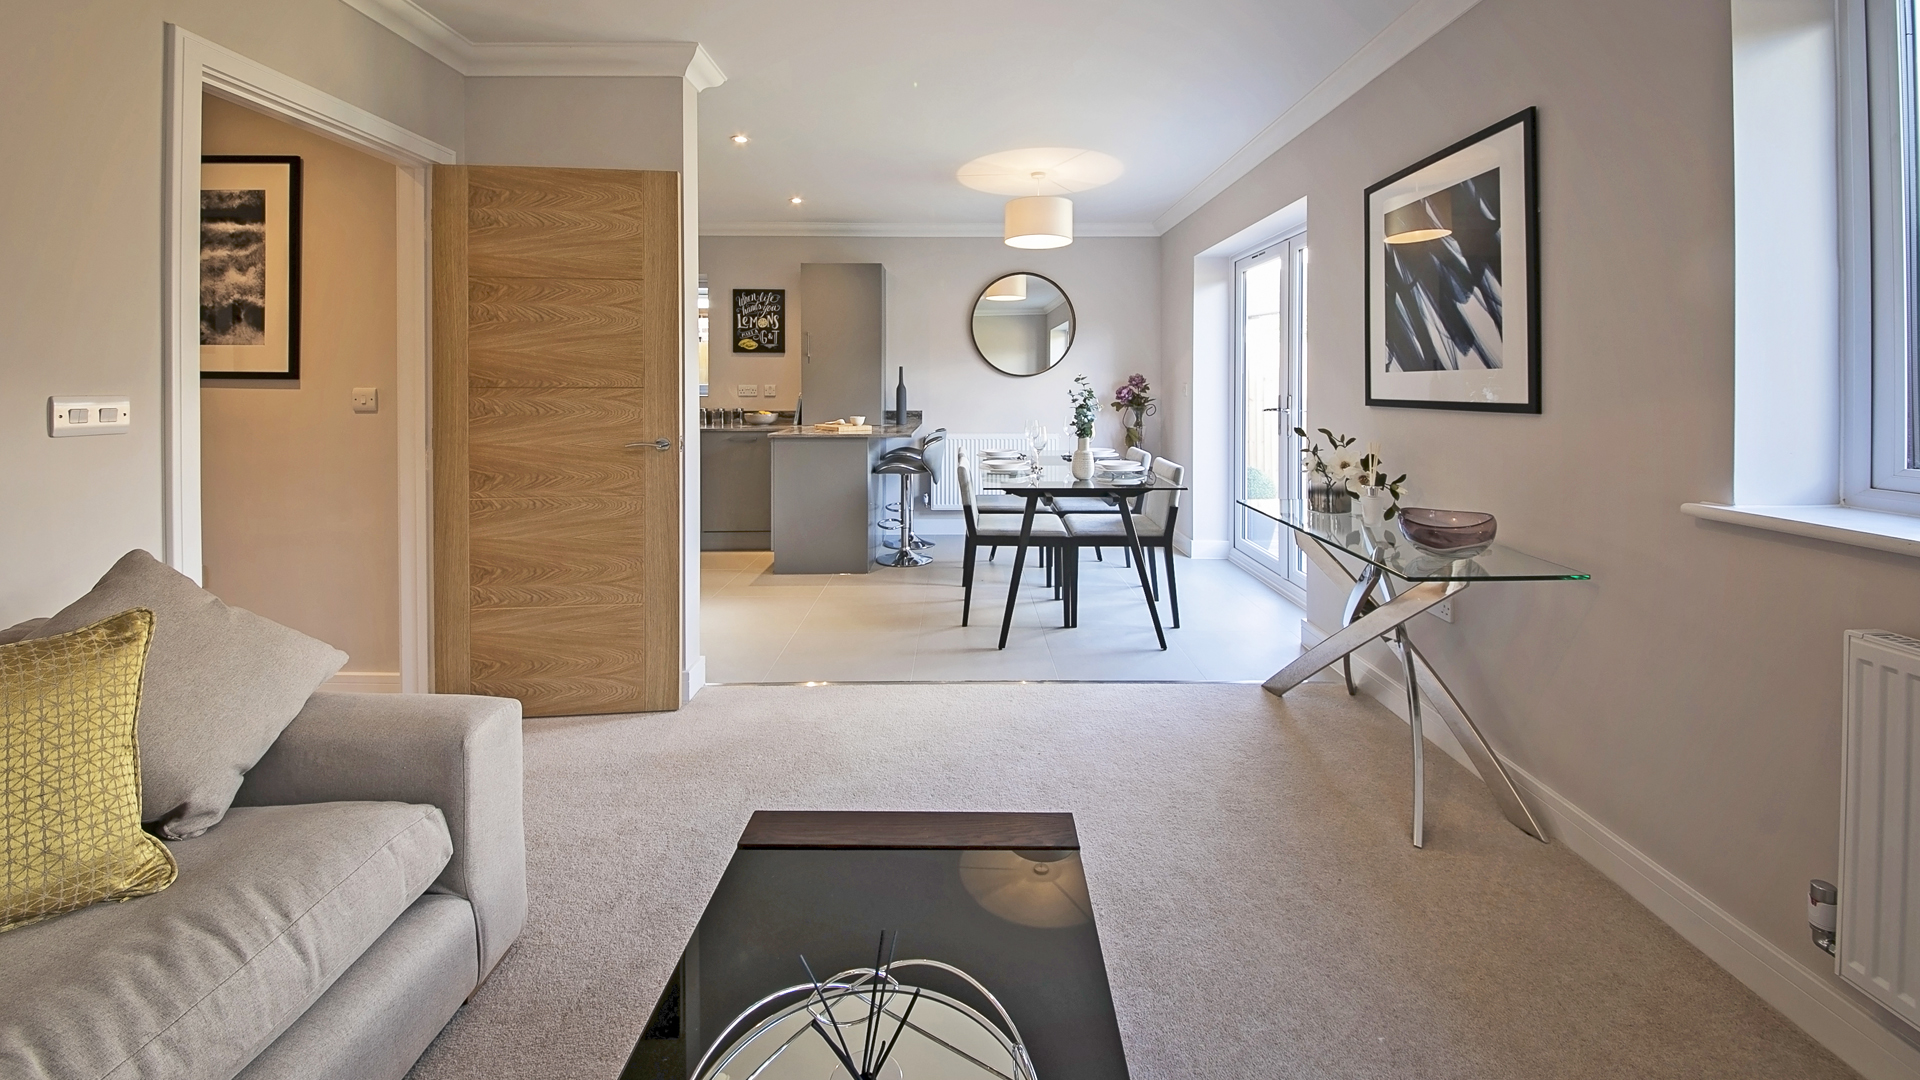 Living room through to kitchen diner at our Churchfields development.